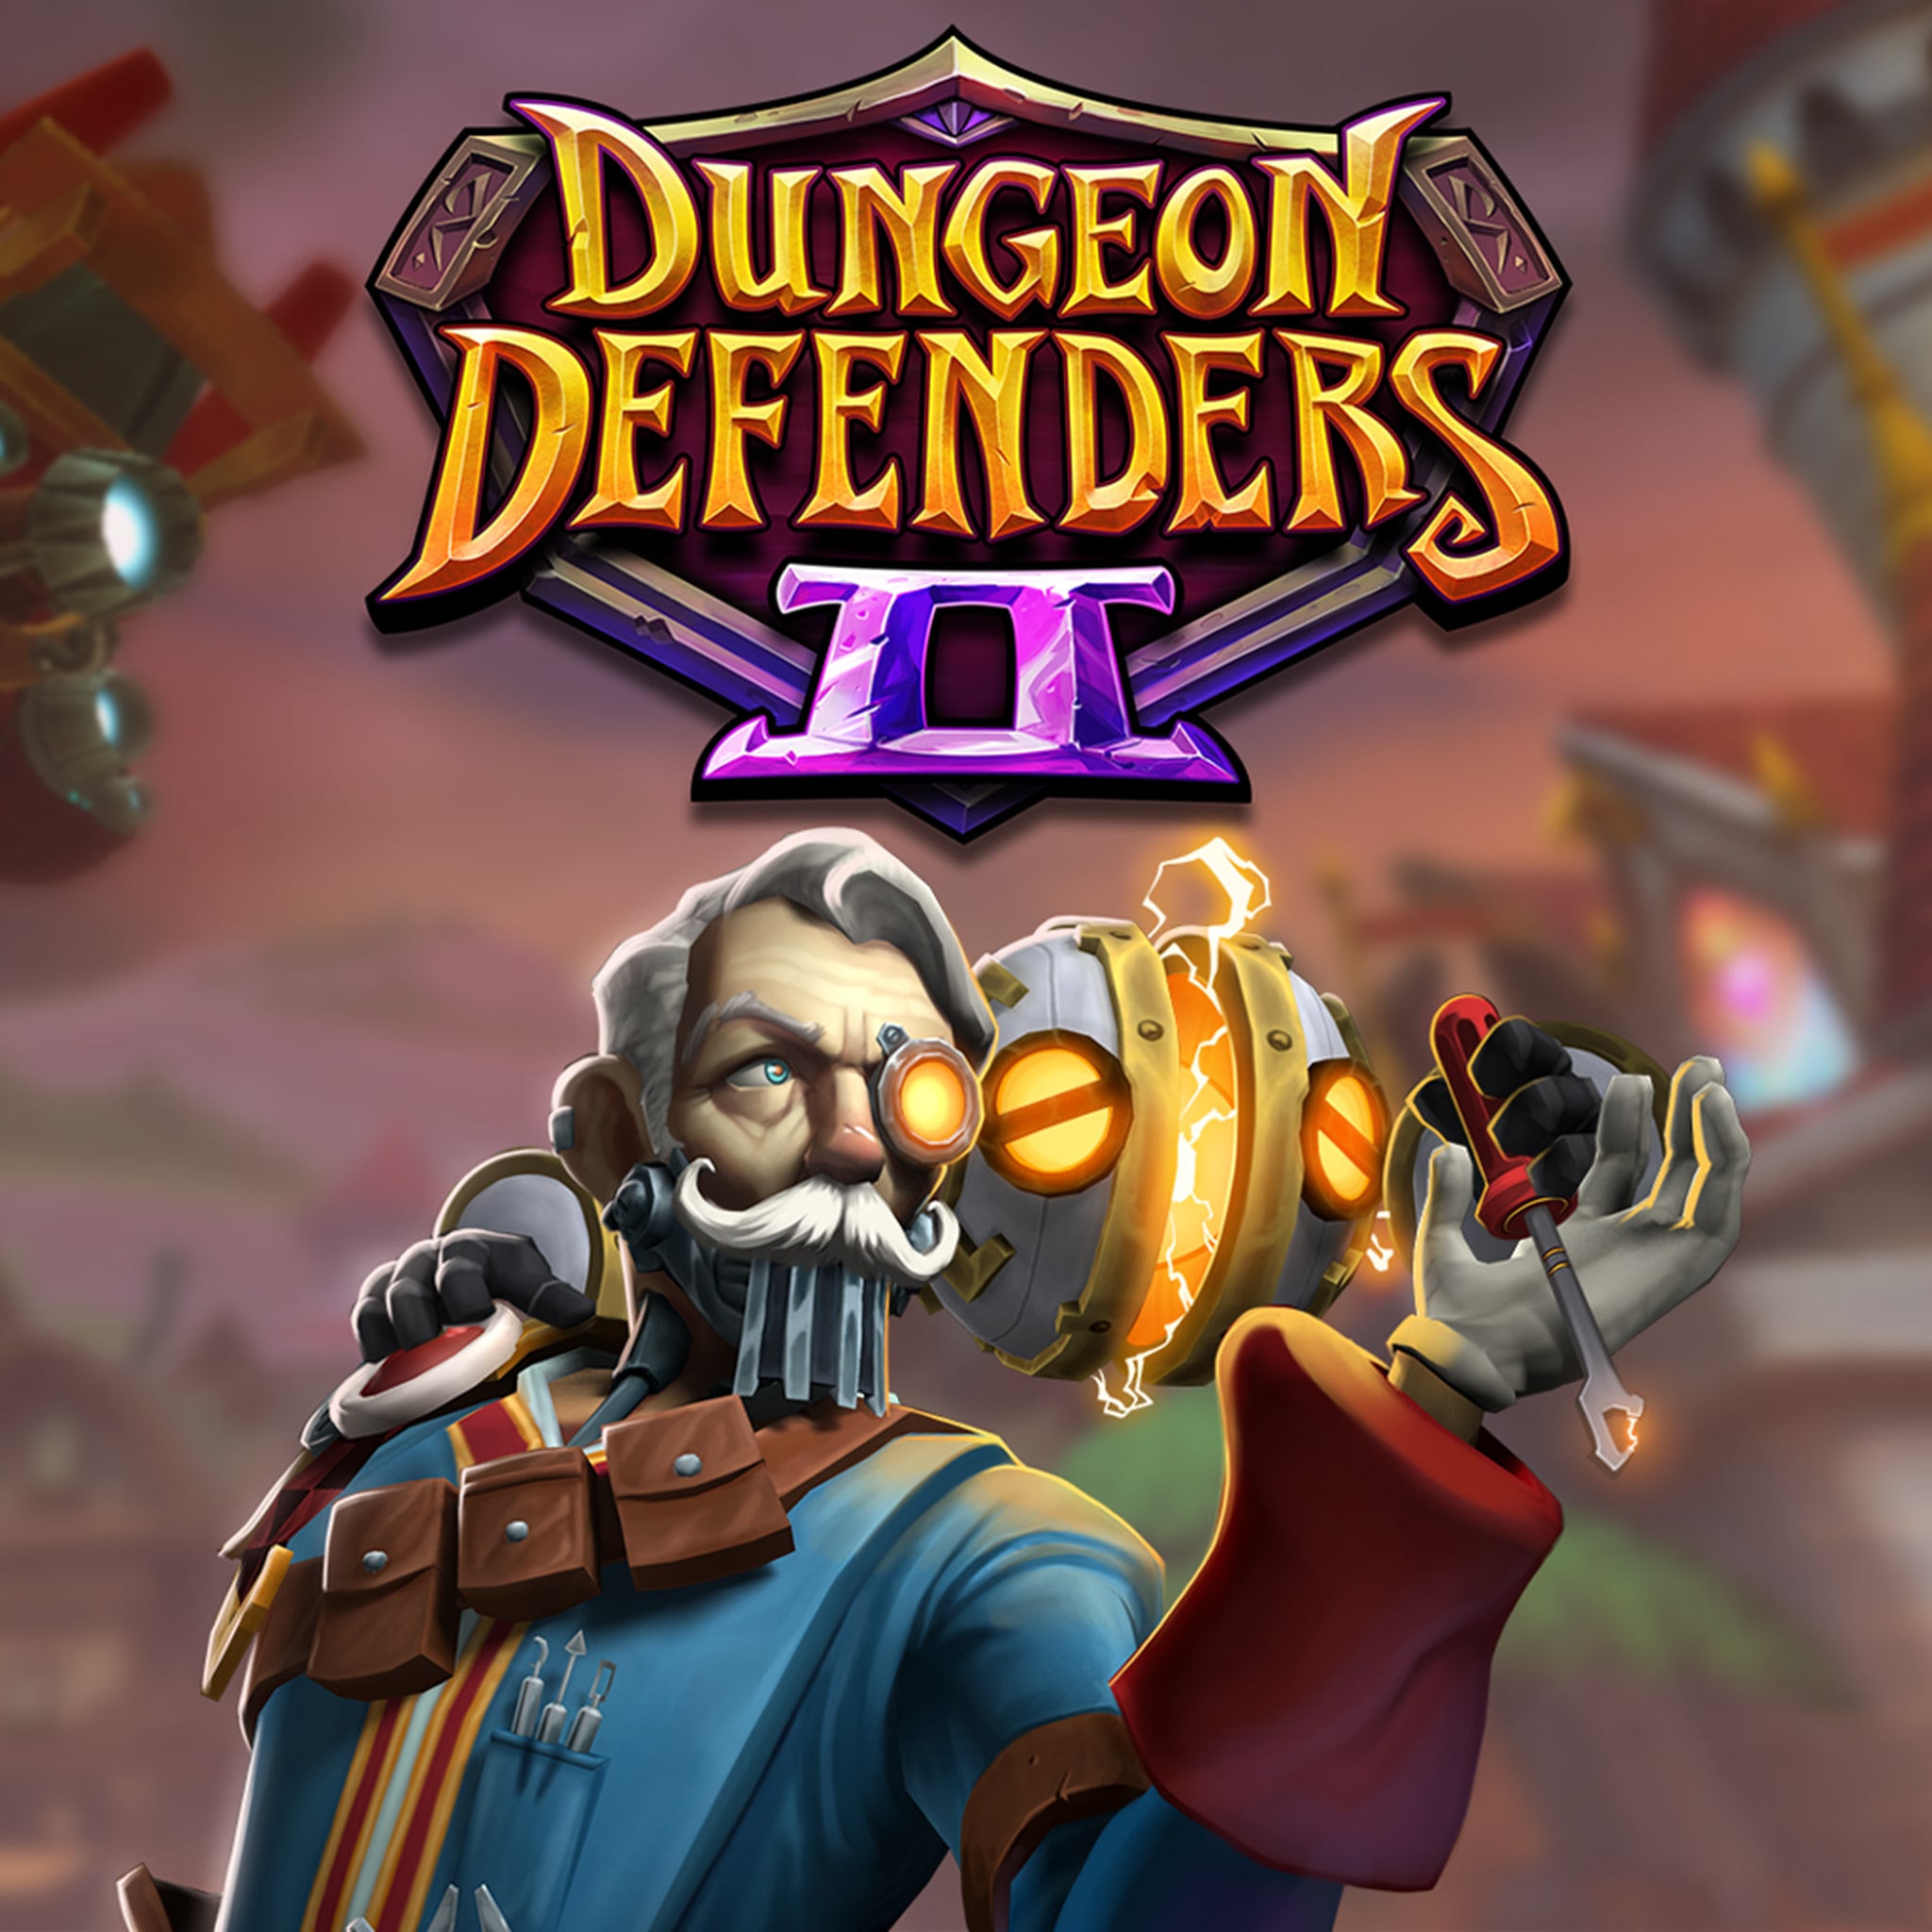 Dungeon Defenders II - What A Deal Pack